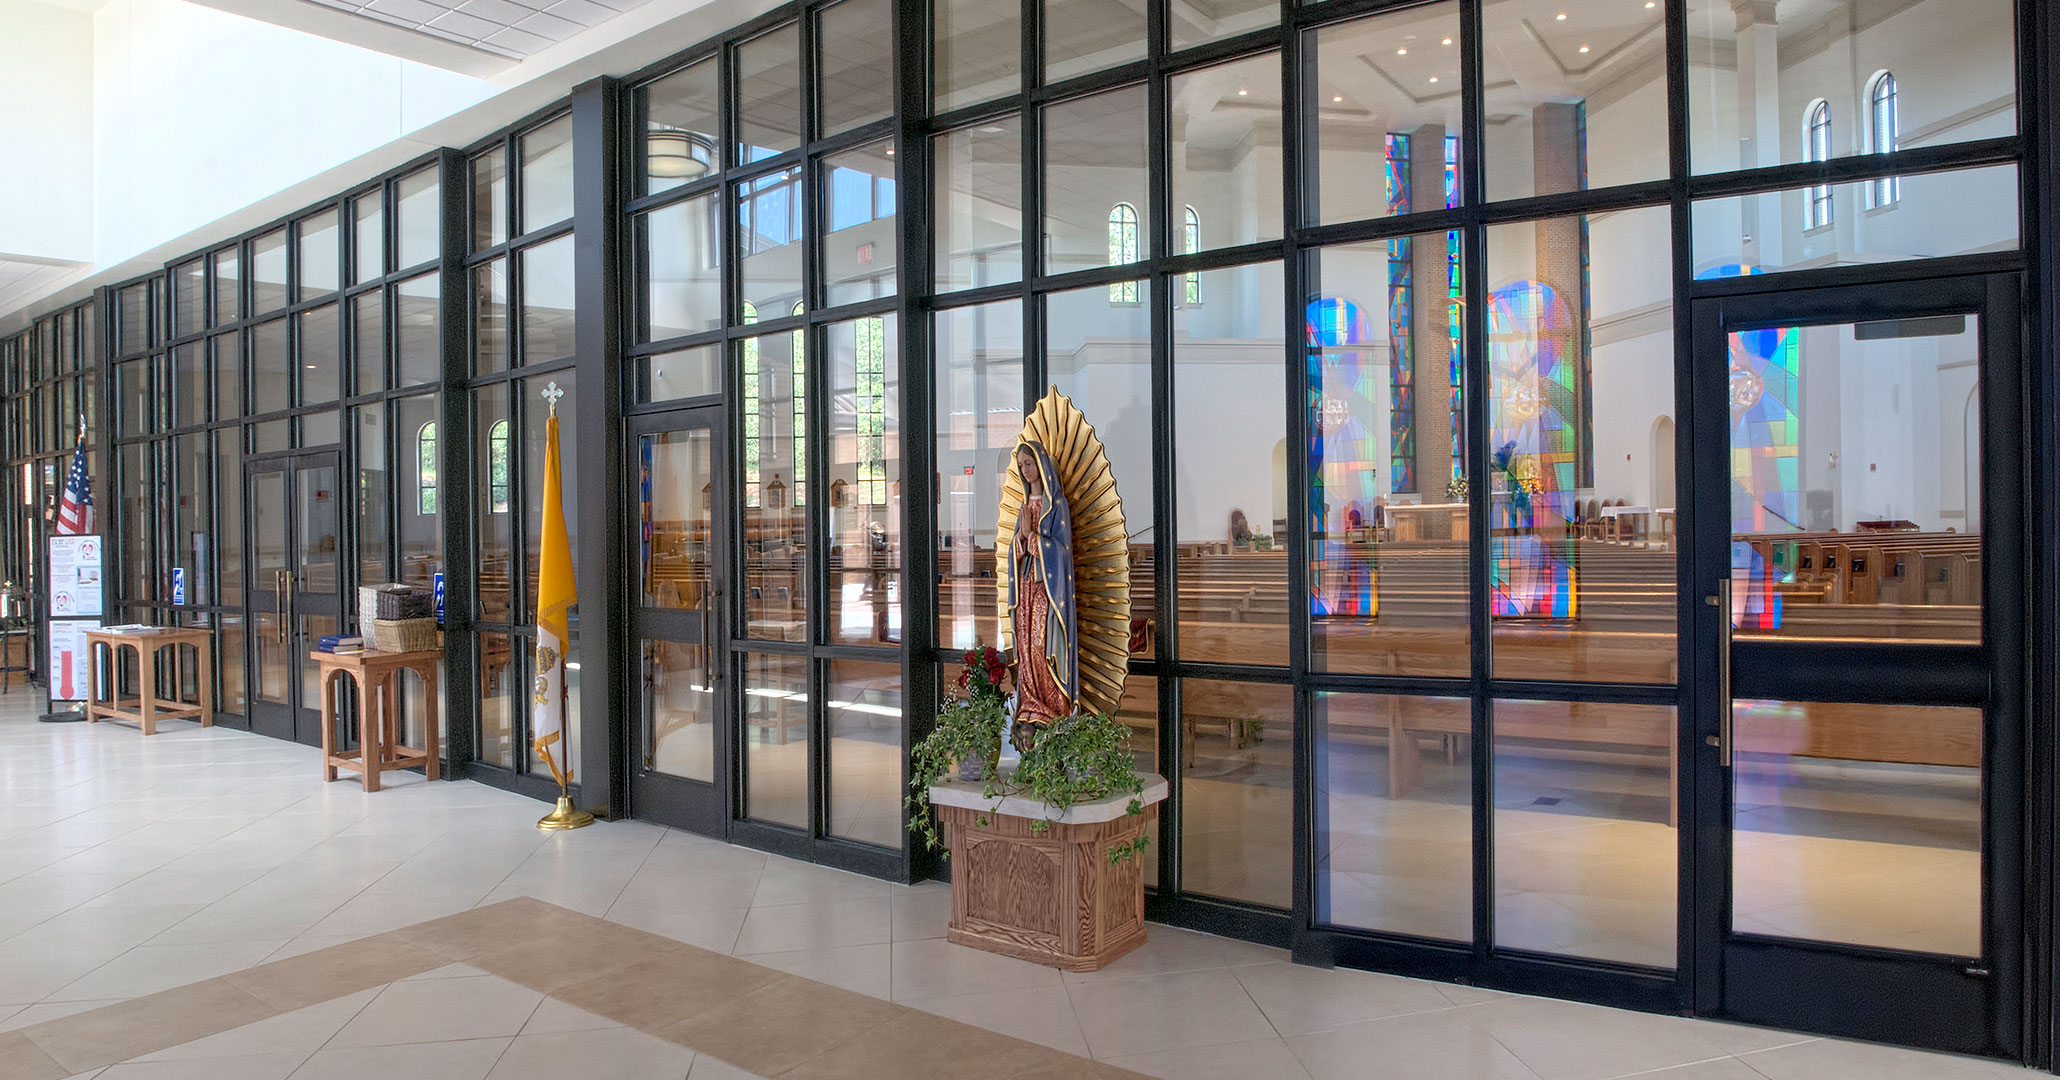 Boudreaux architects and interior designers worked with St. Therese in Mooresville, NC to design a beautiful church.